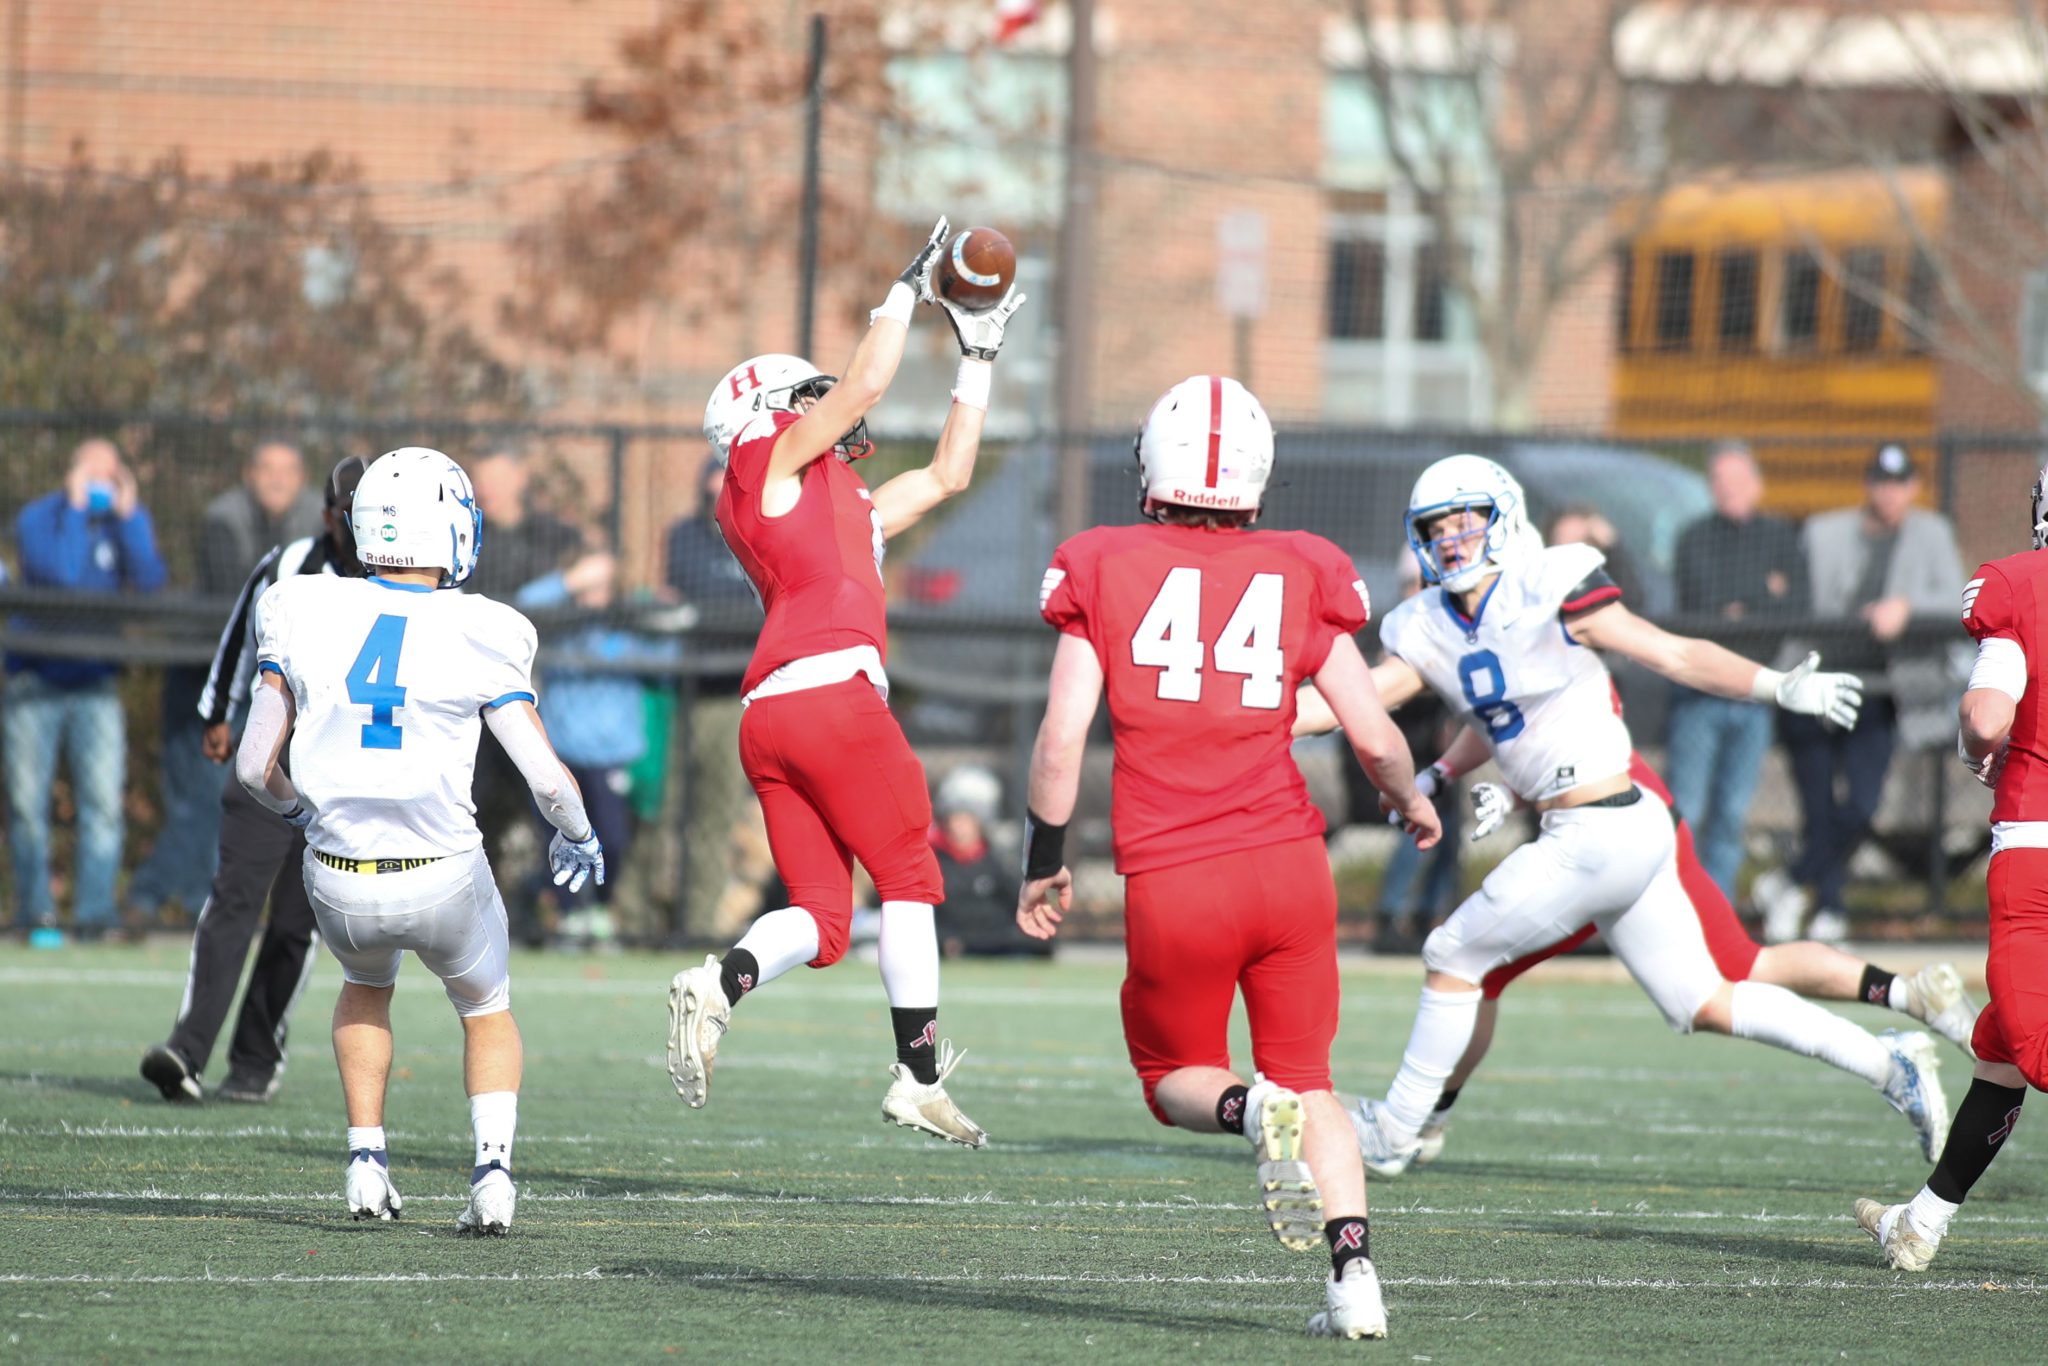 Senior captain Tony Fabrizio with the late game interception in the upset against Scituate on Thanskgiving. 